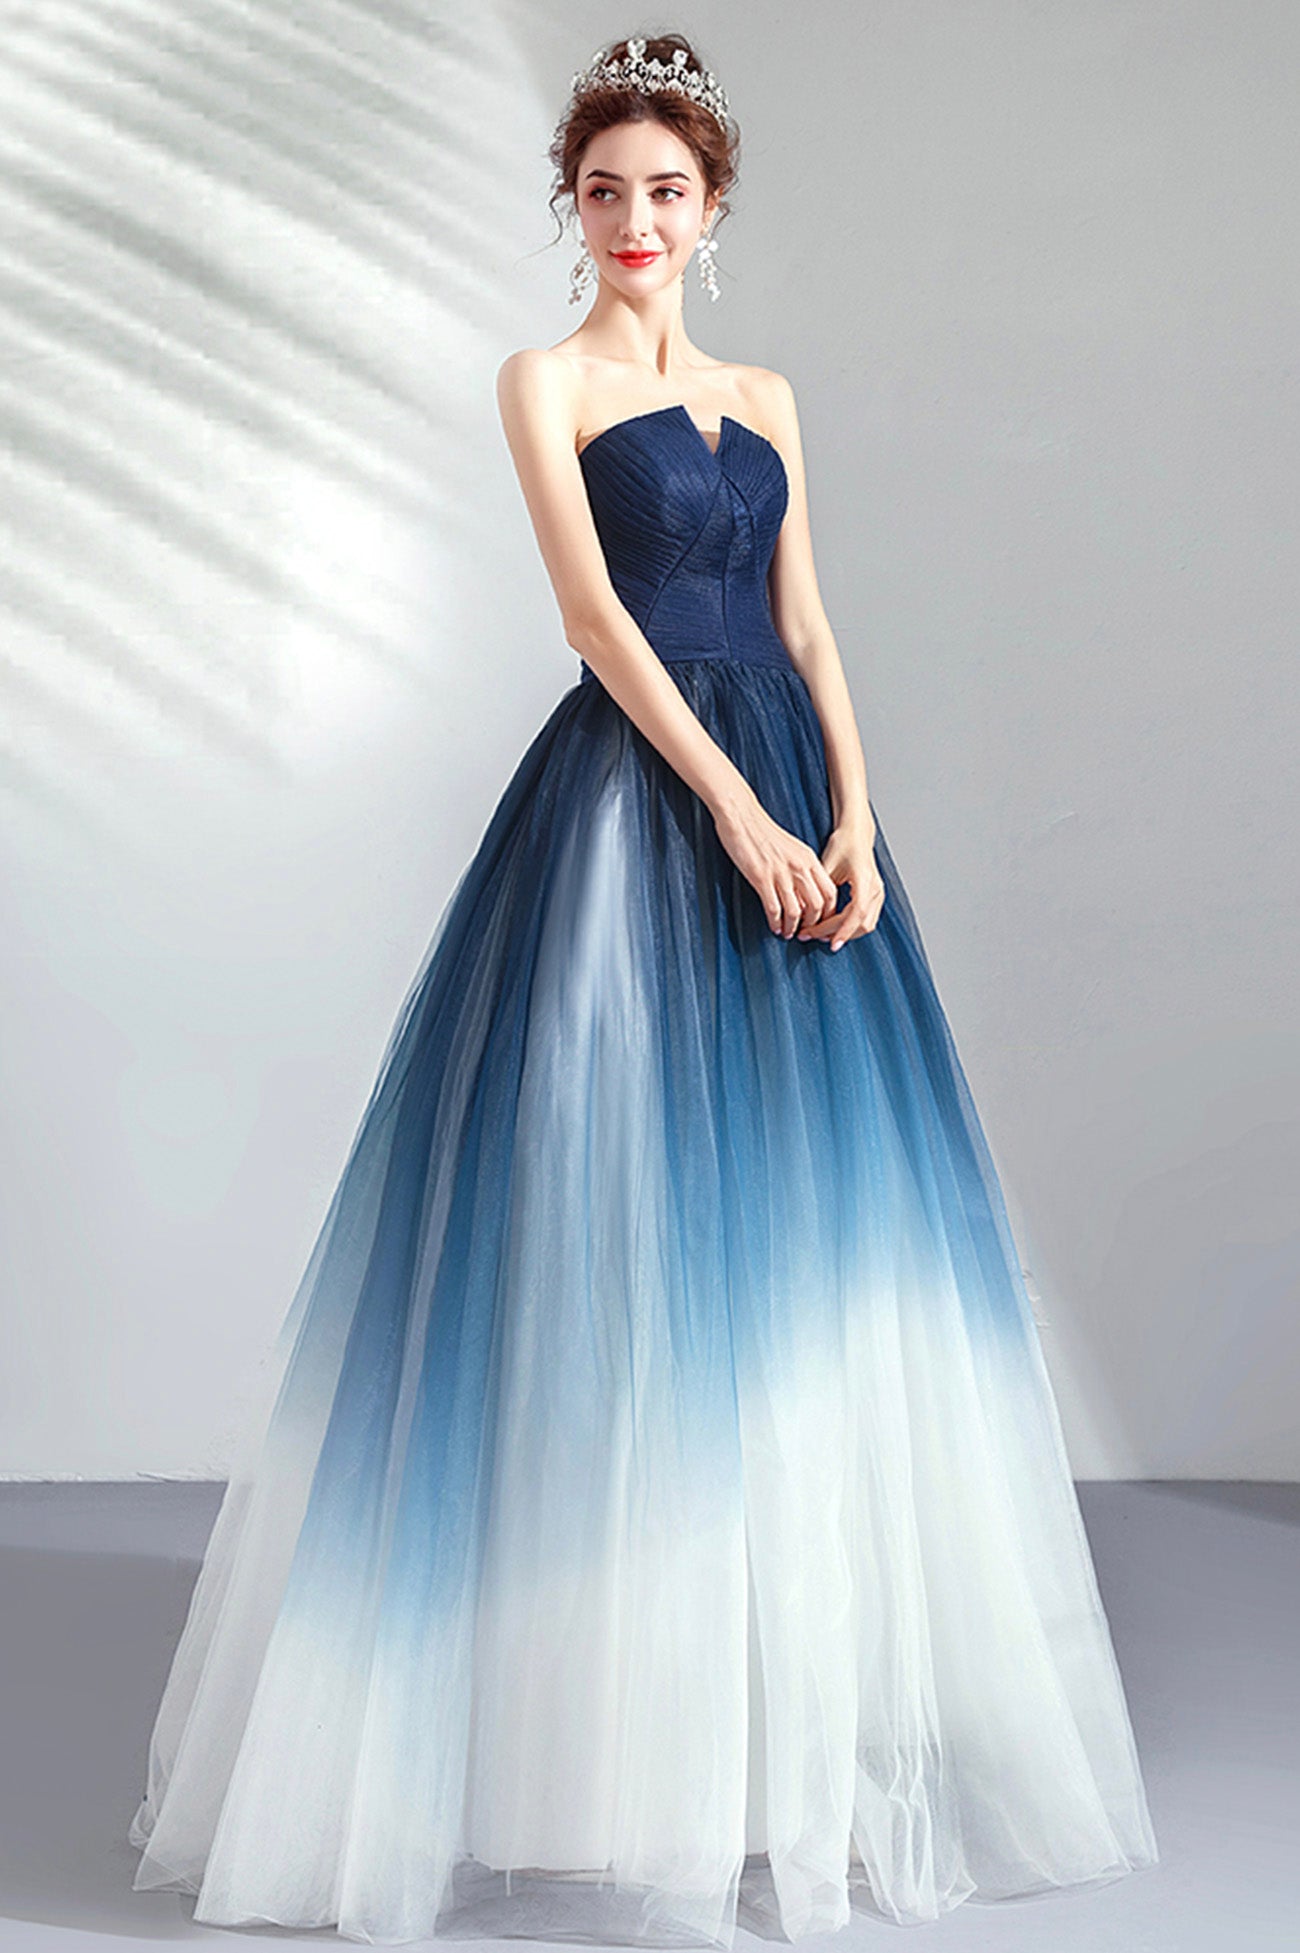 Blue Gradient Tulle Strapless Long A-Line Prom Dress, Blue Evening Party Dress